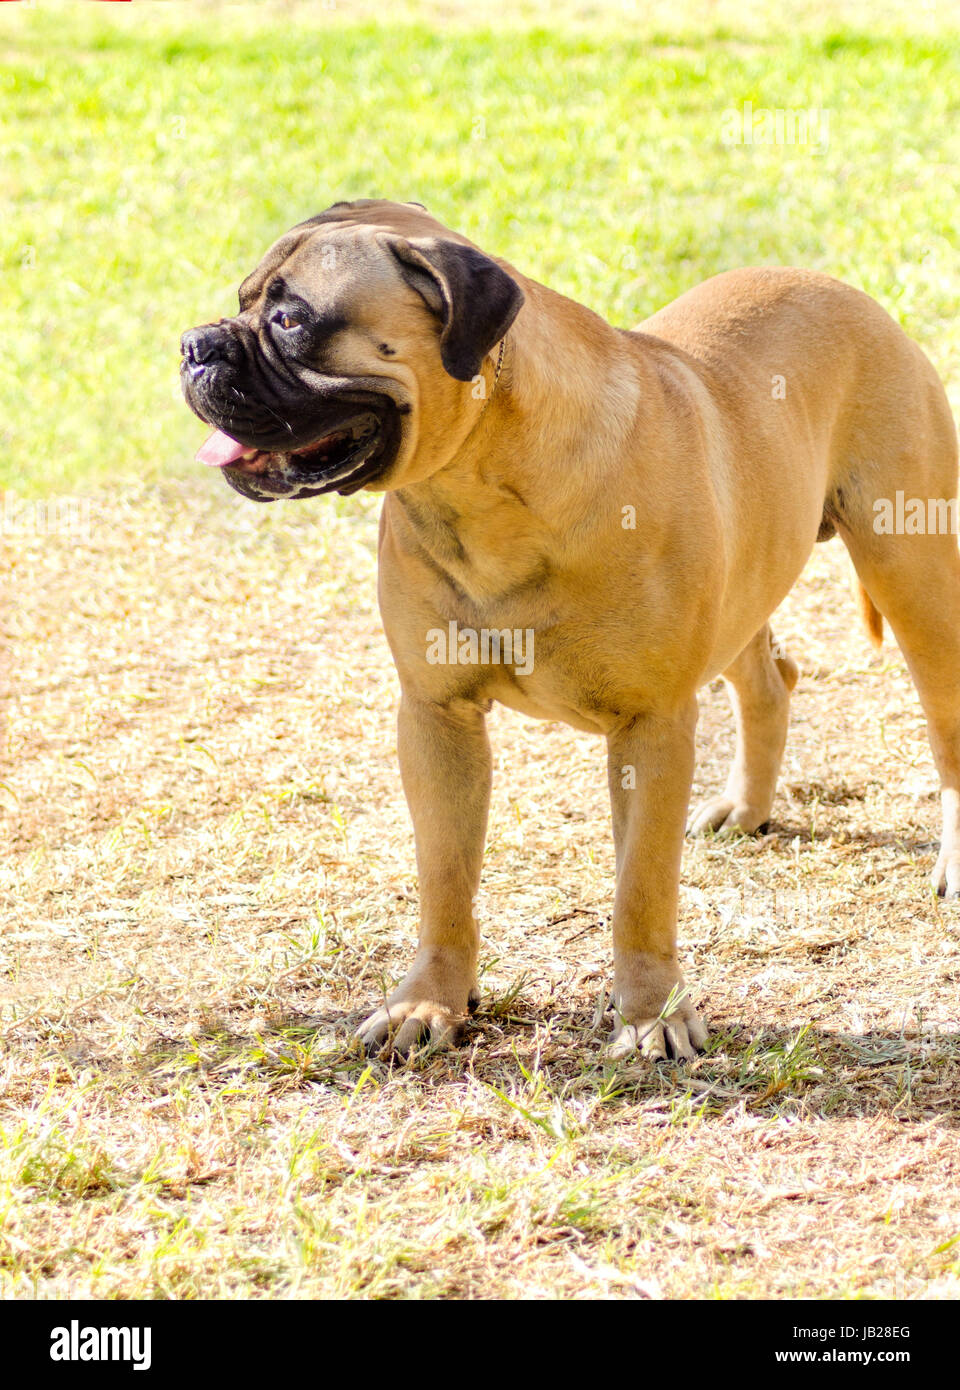 A young, beautiful red fawn, medium sized Bullmastiff dog standing on the grass. The Bullmastiff is a powerfully built animal with great intelligence and a willingness to please. Stock Photo